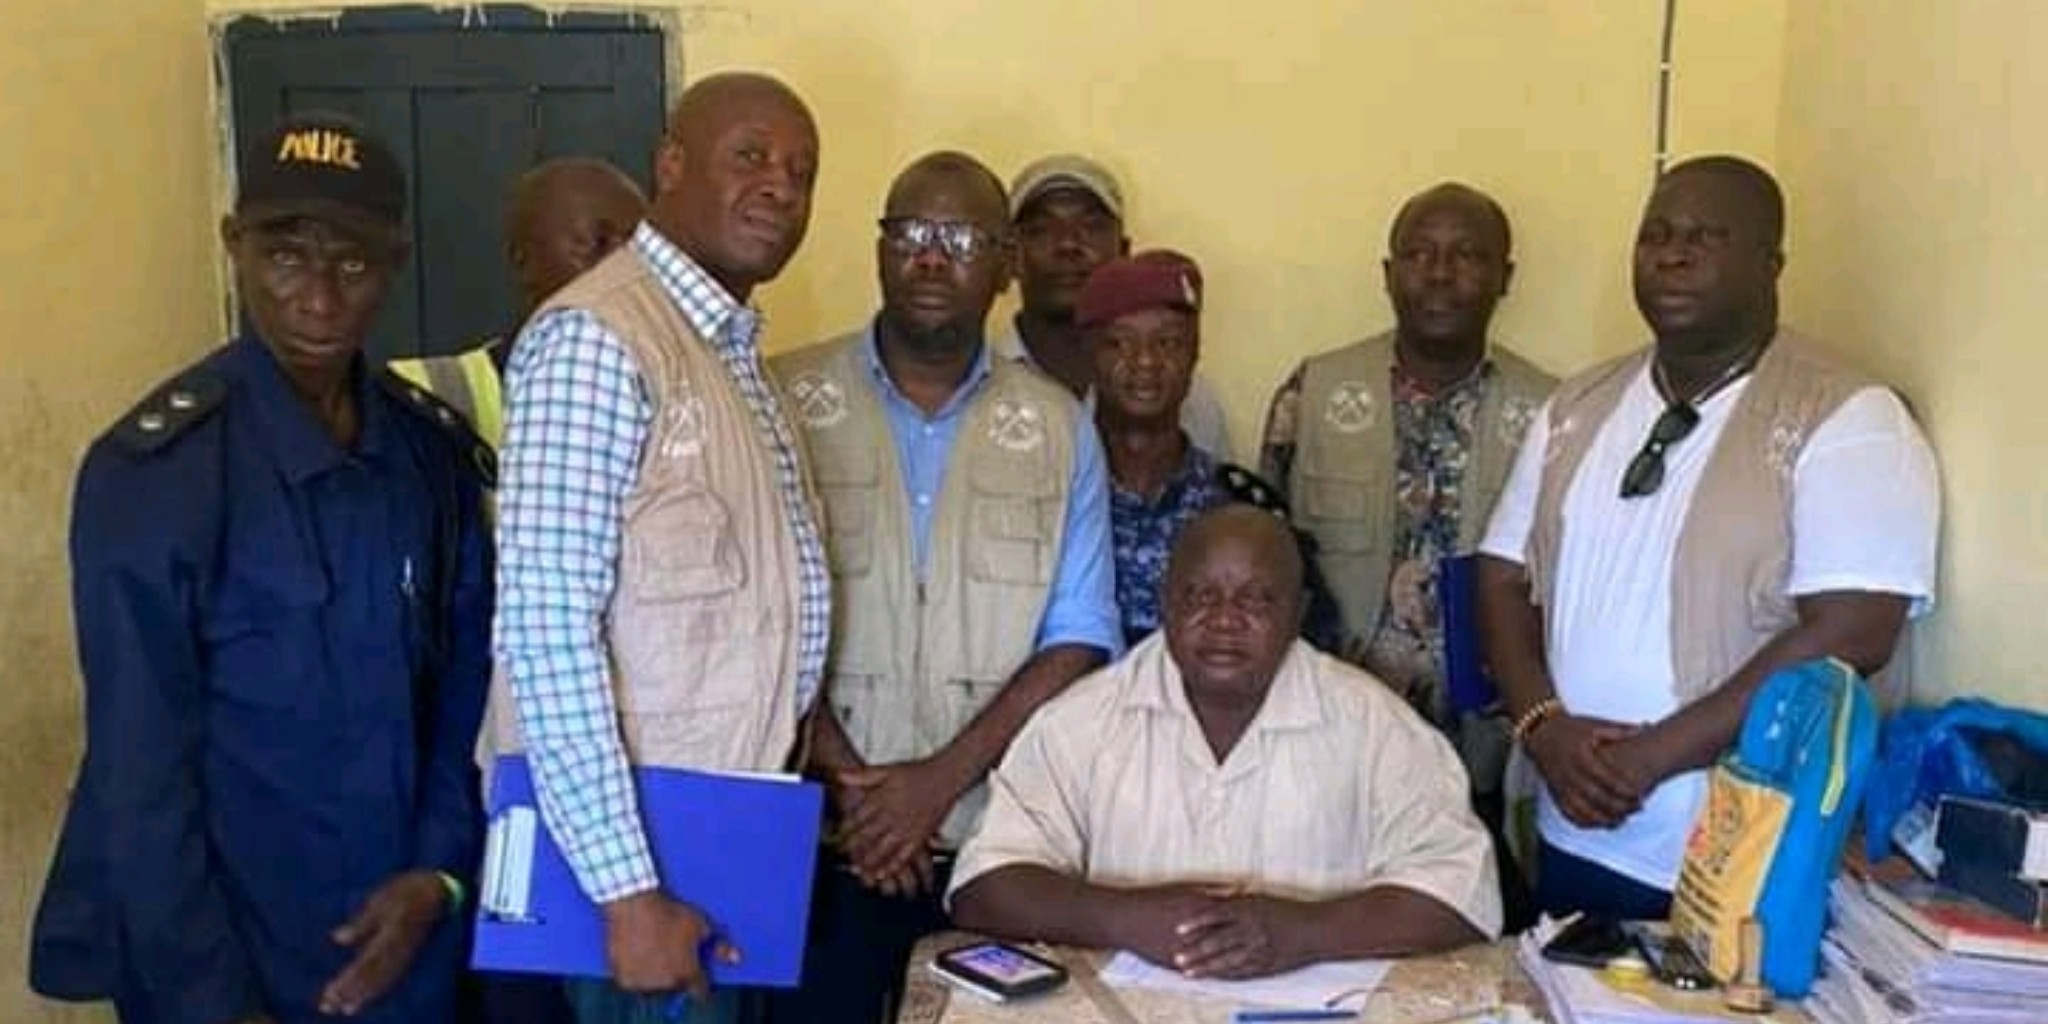 United States Embassy Elections Observers Pay Visit to Kailahun And Port Loko Ahead of By-Elections